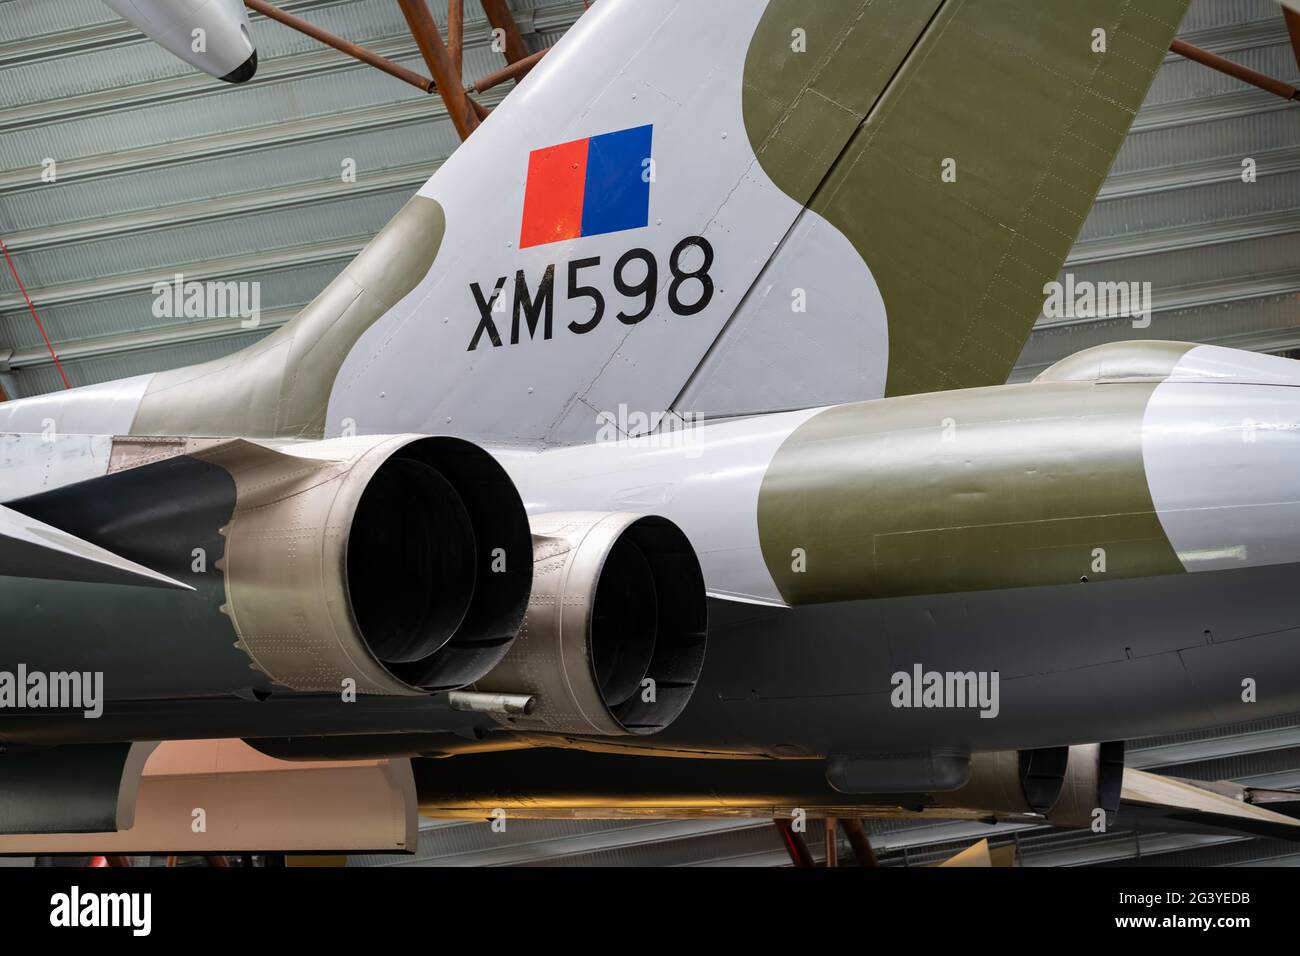 Vulcan Jet Tail Pipes and Registration Number, RAF Museum, Cosford Stock Photo